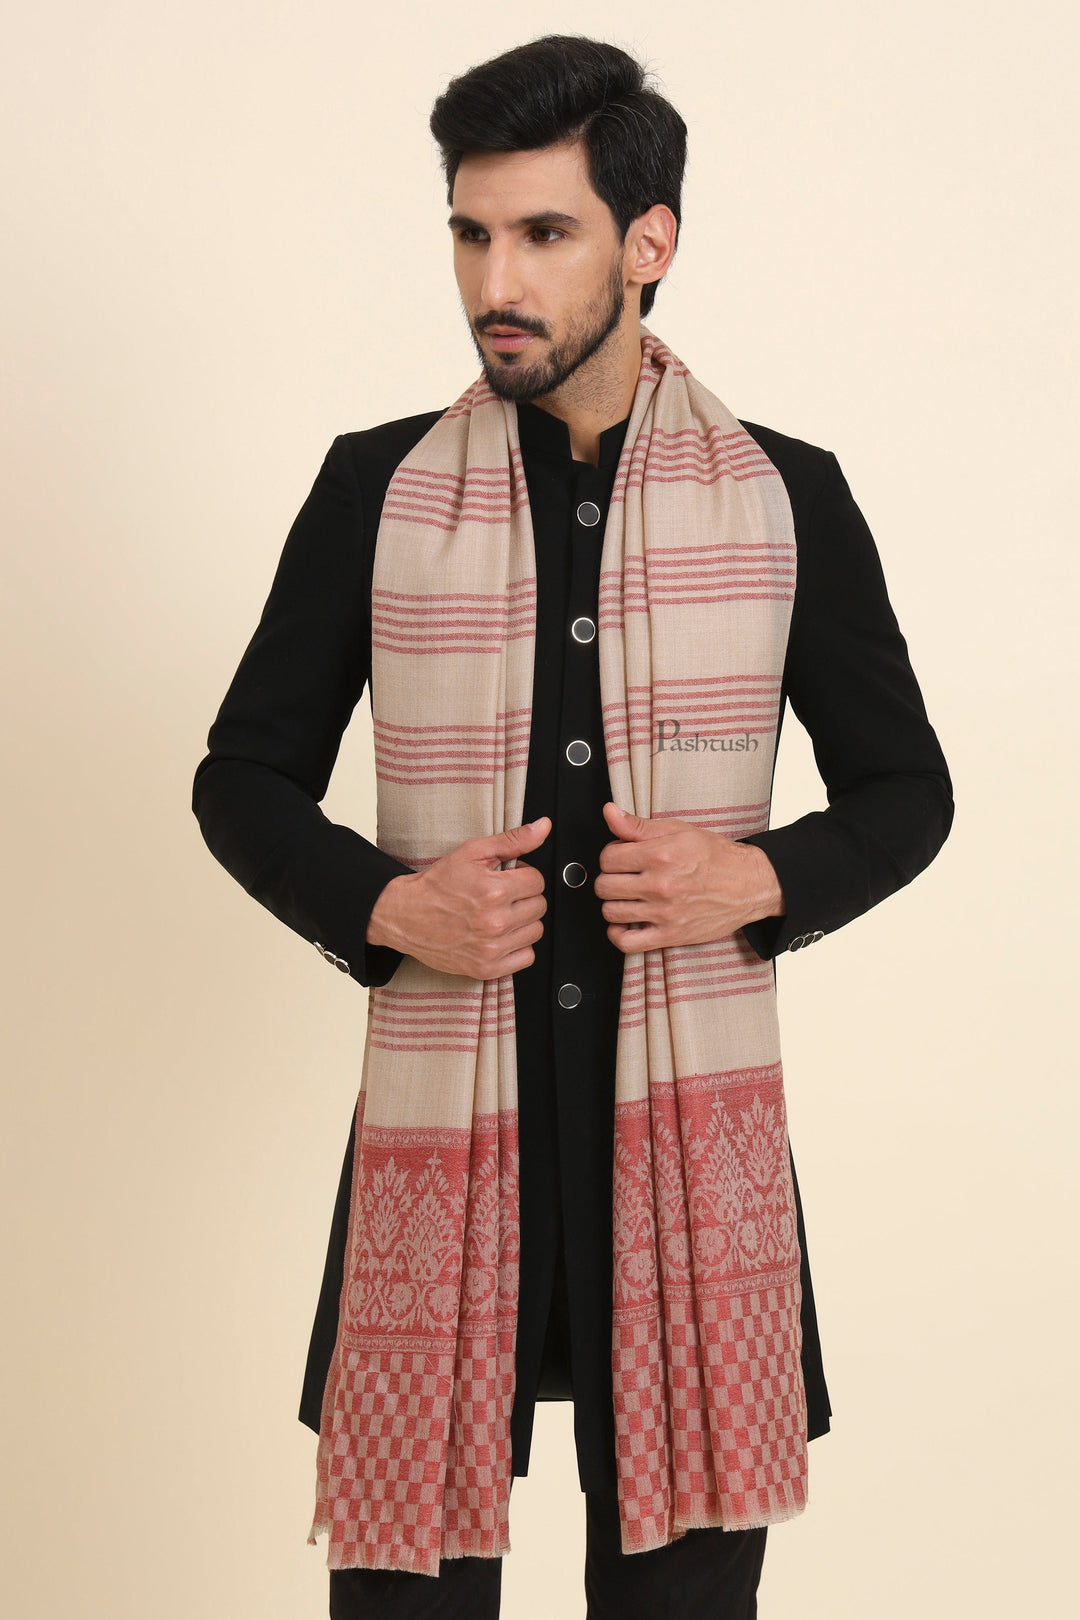 Pashtush India Mens Scarves Stoles and Mufflers Pashtush Mens Extra Fine Wool Stole, Checkered Palla With Striped Design, Beige And Maroon